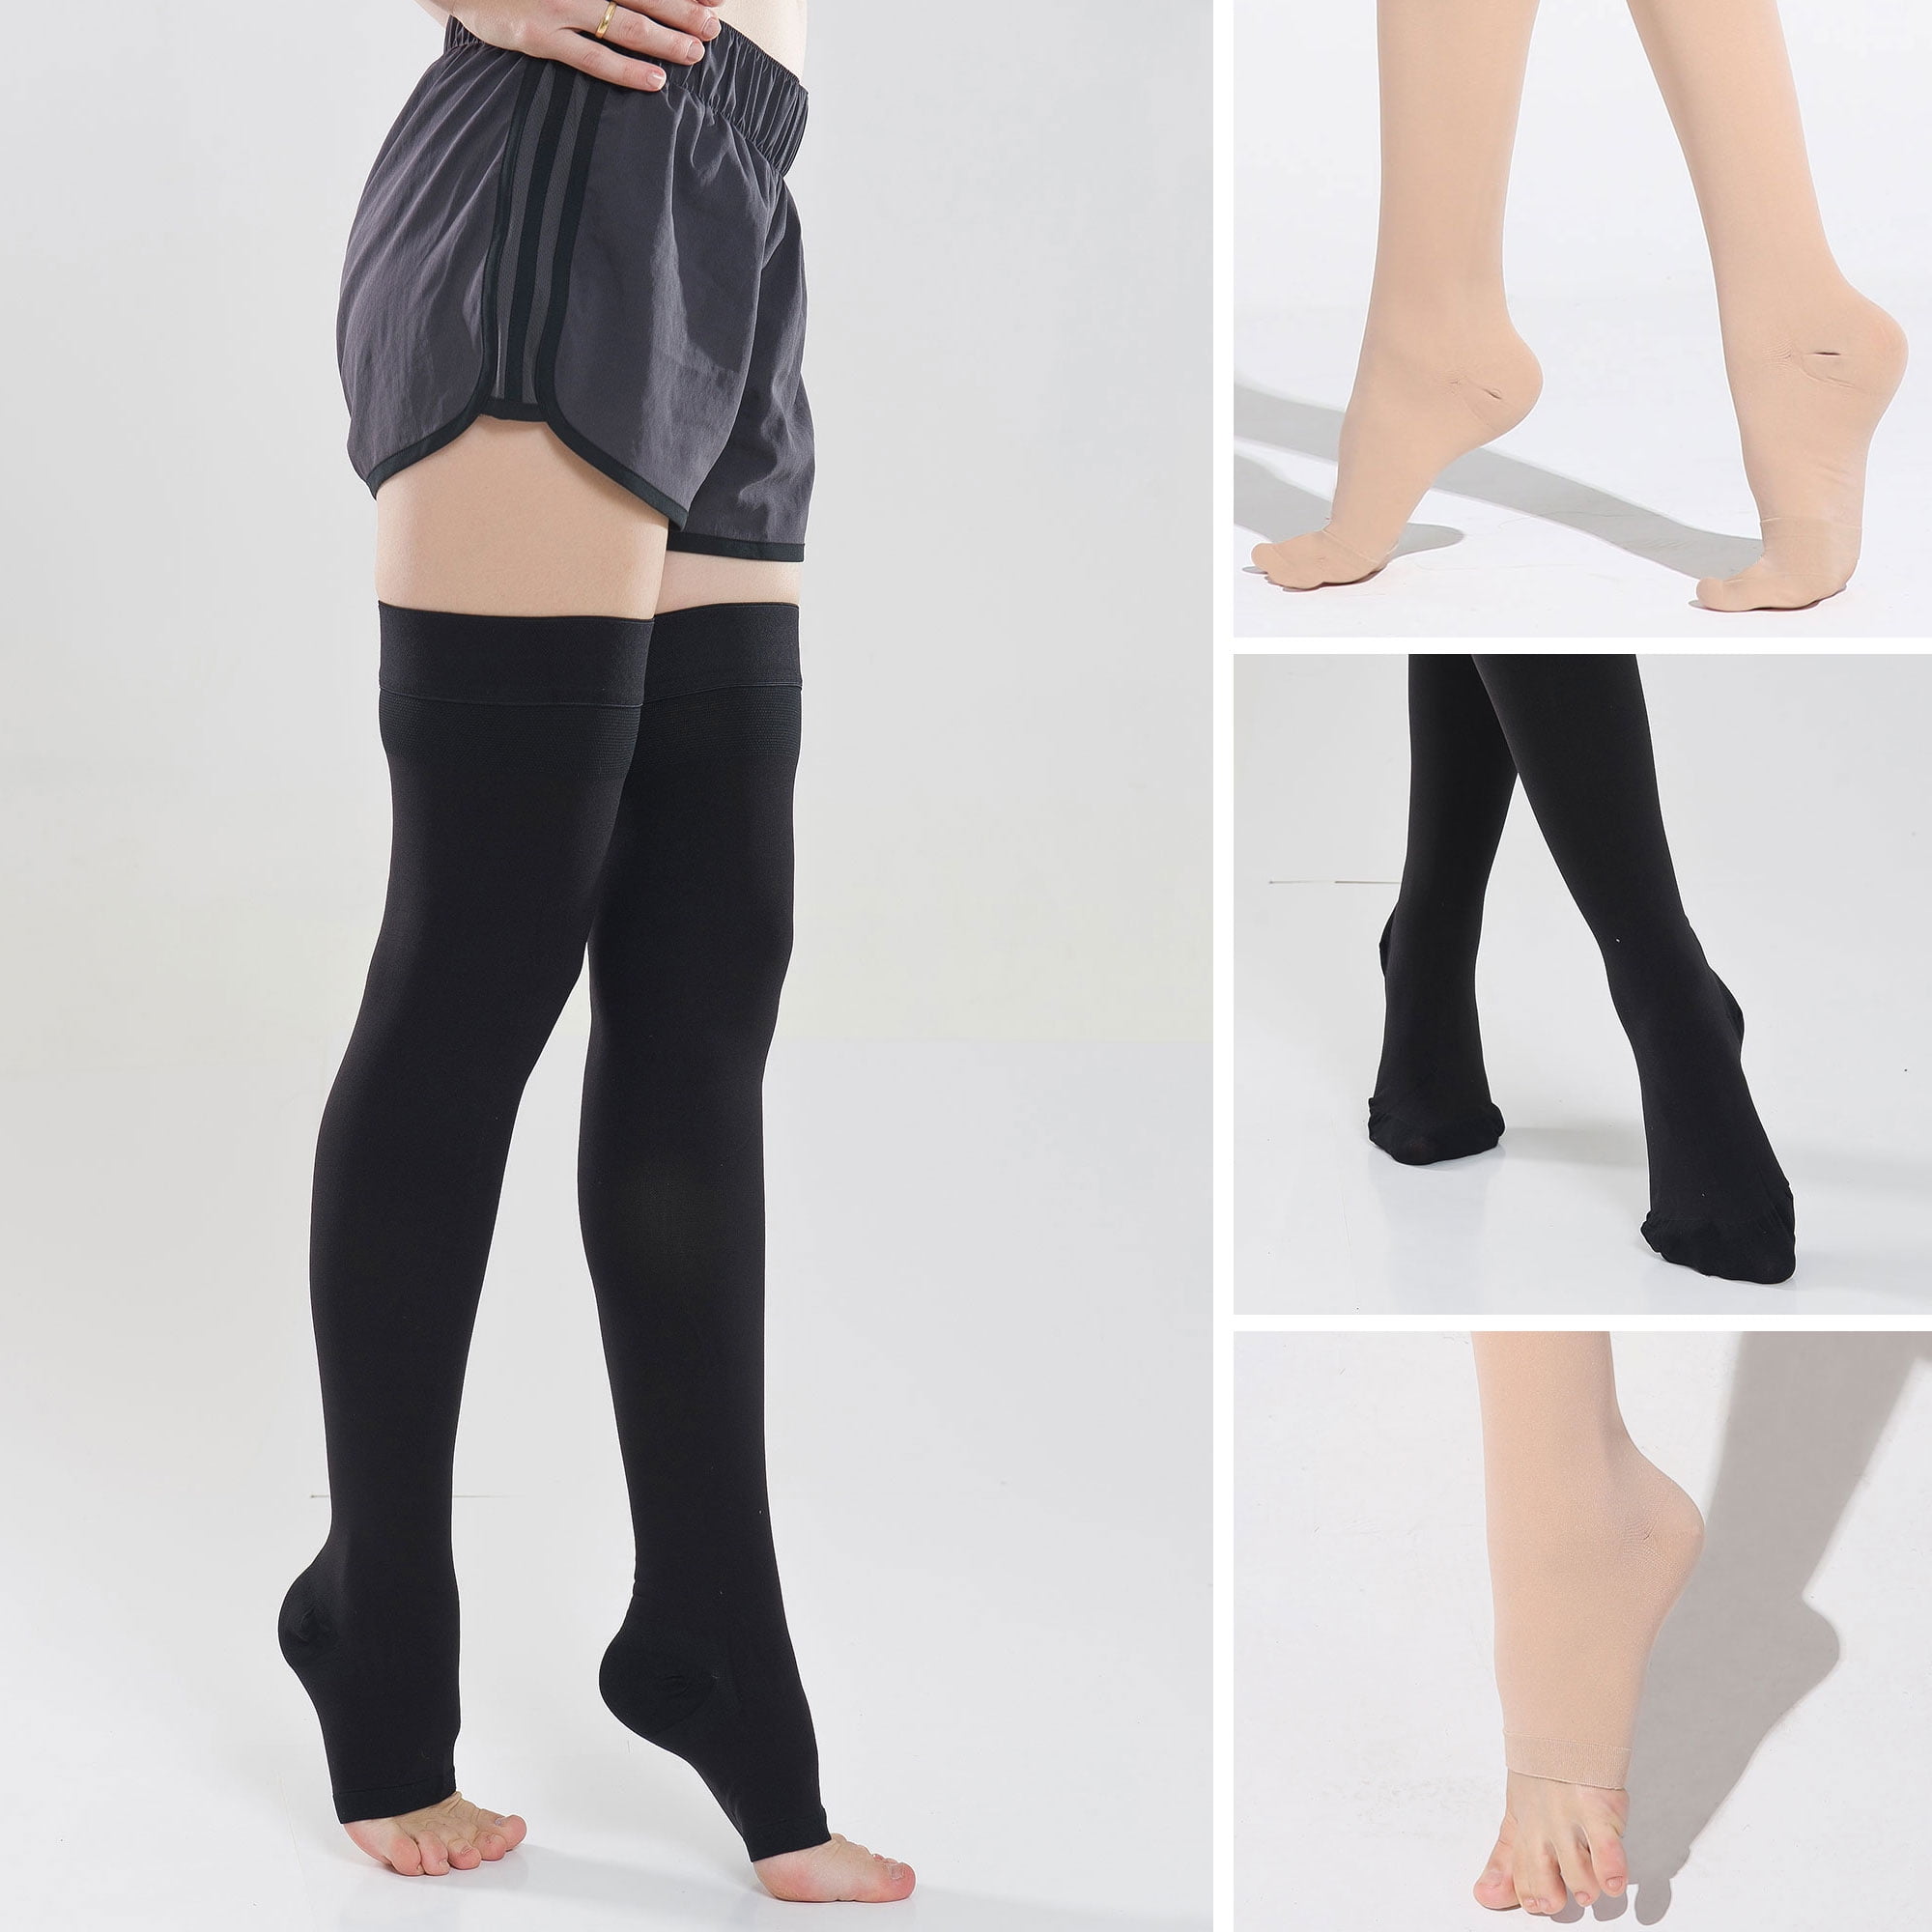 Thigh High Compression Stockings Varicose Veins Support Sport Stockings ...